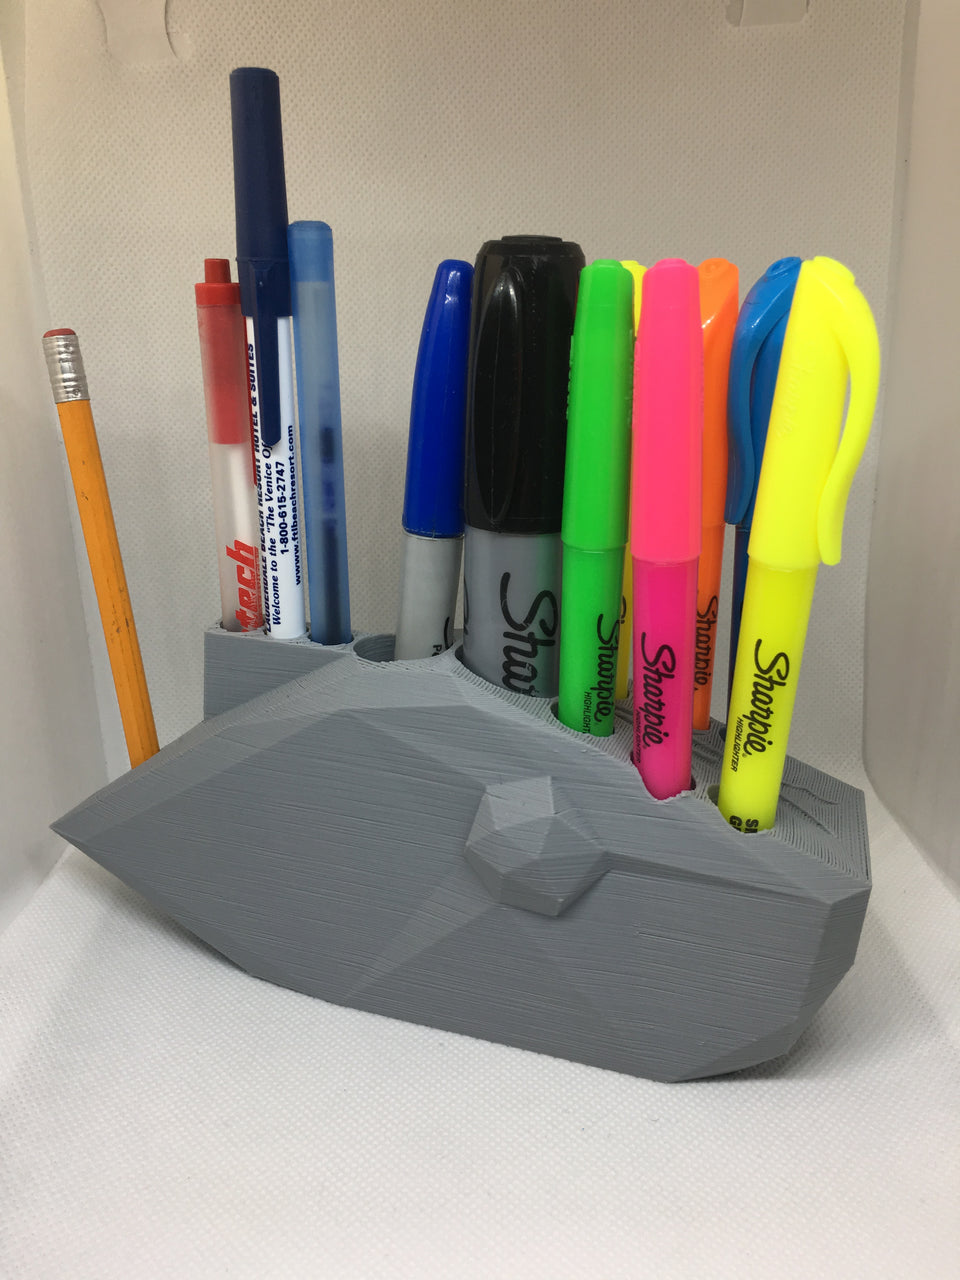 FISHING LURE PEN HOLDER LOW POLY VERSION 3 (STL FILE) – UPSCALE LURES,  Sharpie Holder 